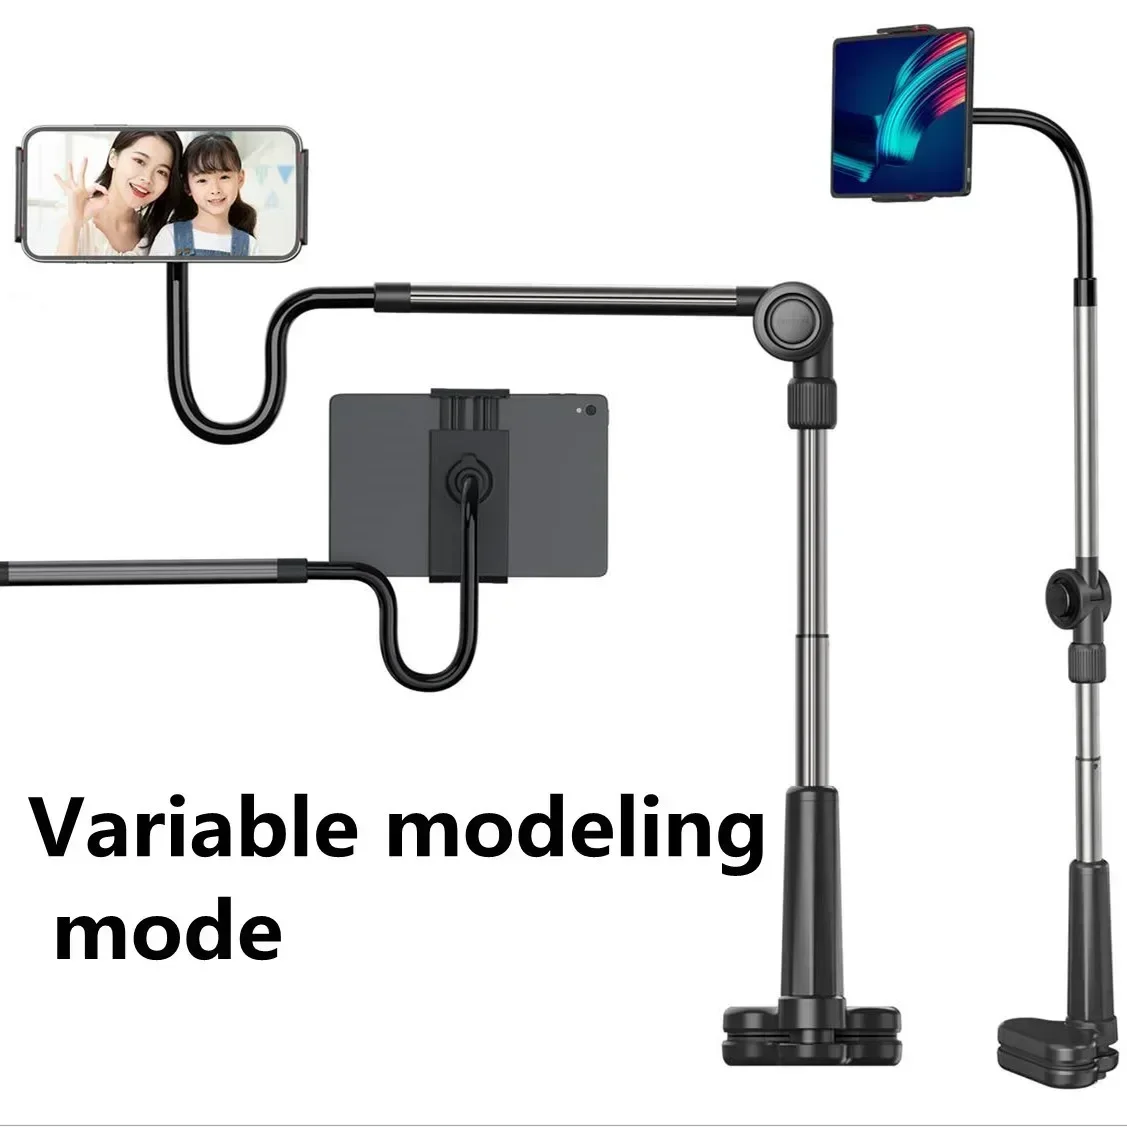 

Phone & Tablet Bed Holder Cellphone Stand Flexible Overhead Mount Clamp Clip for Desk Bedside Headboard for iPhone/iPad/Tablet